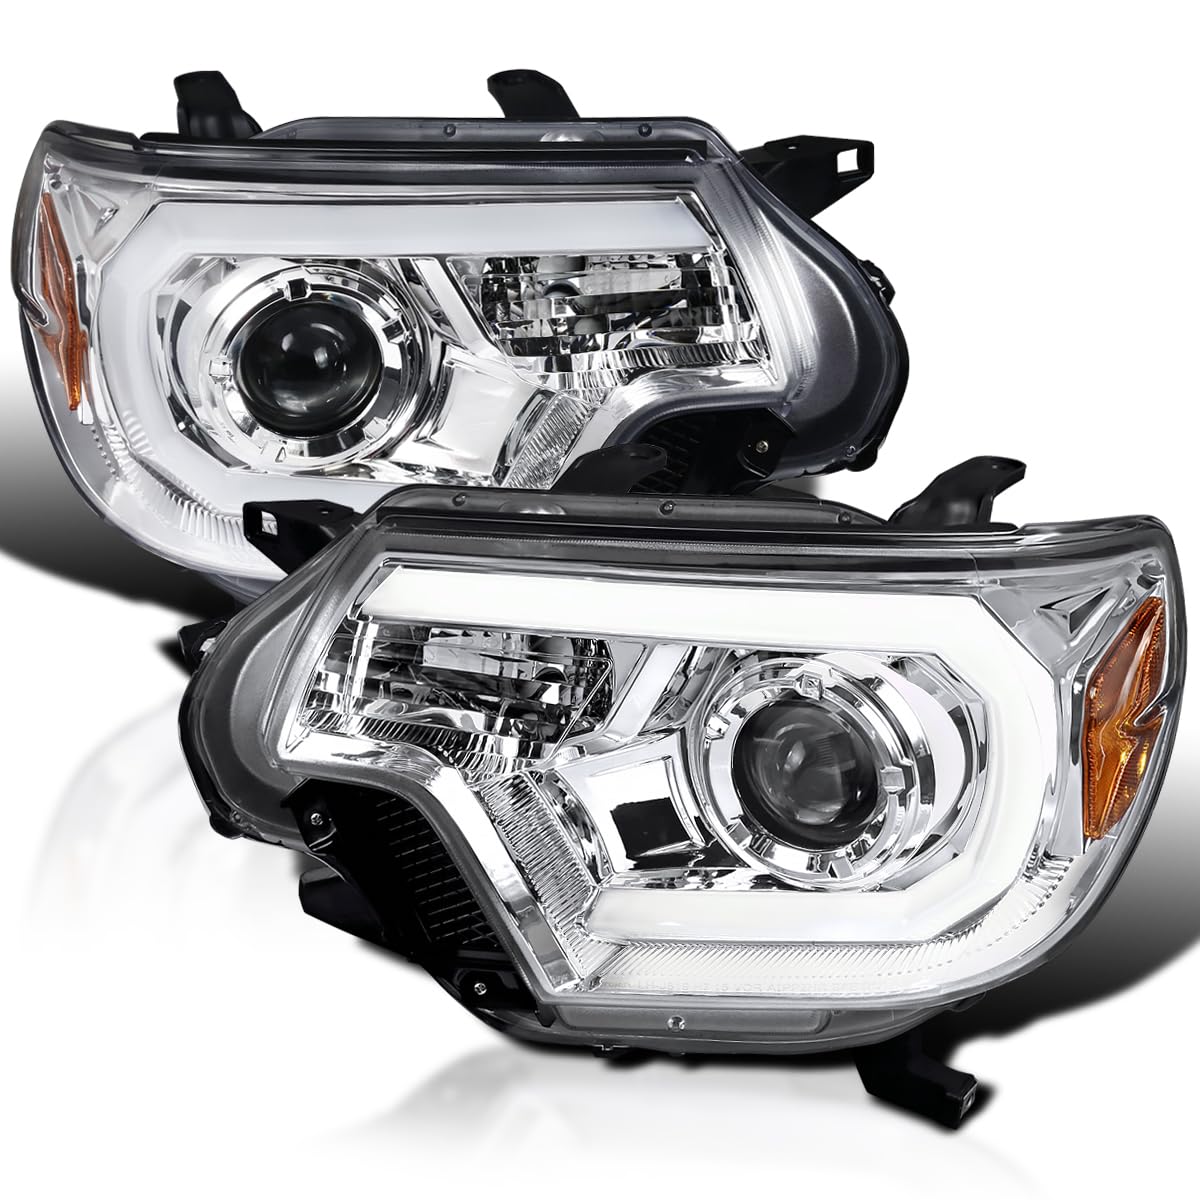 Spec-D Tuning LED Light Bar Chrome Housing Clear Lens Projector Headlights Compatible with 2012-2015 Toyota Tacoma Left + Right Pair Headlamps Assembly